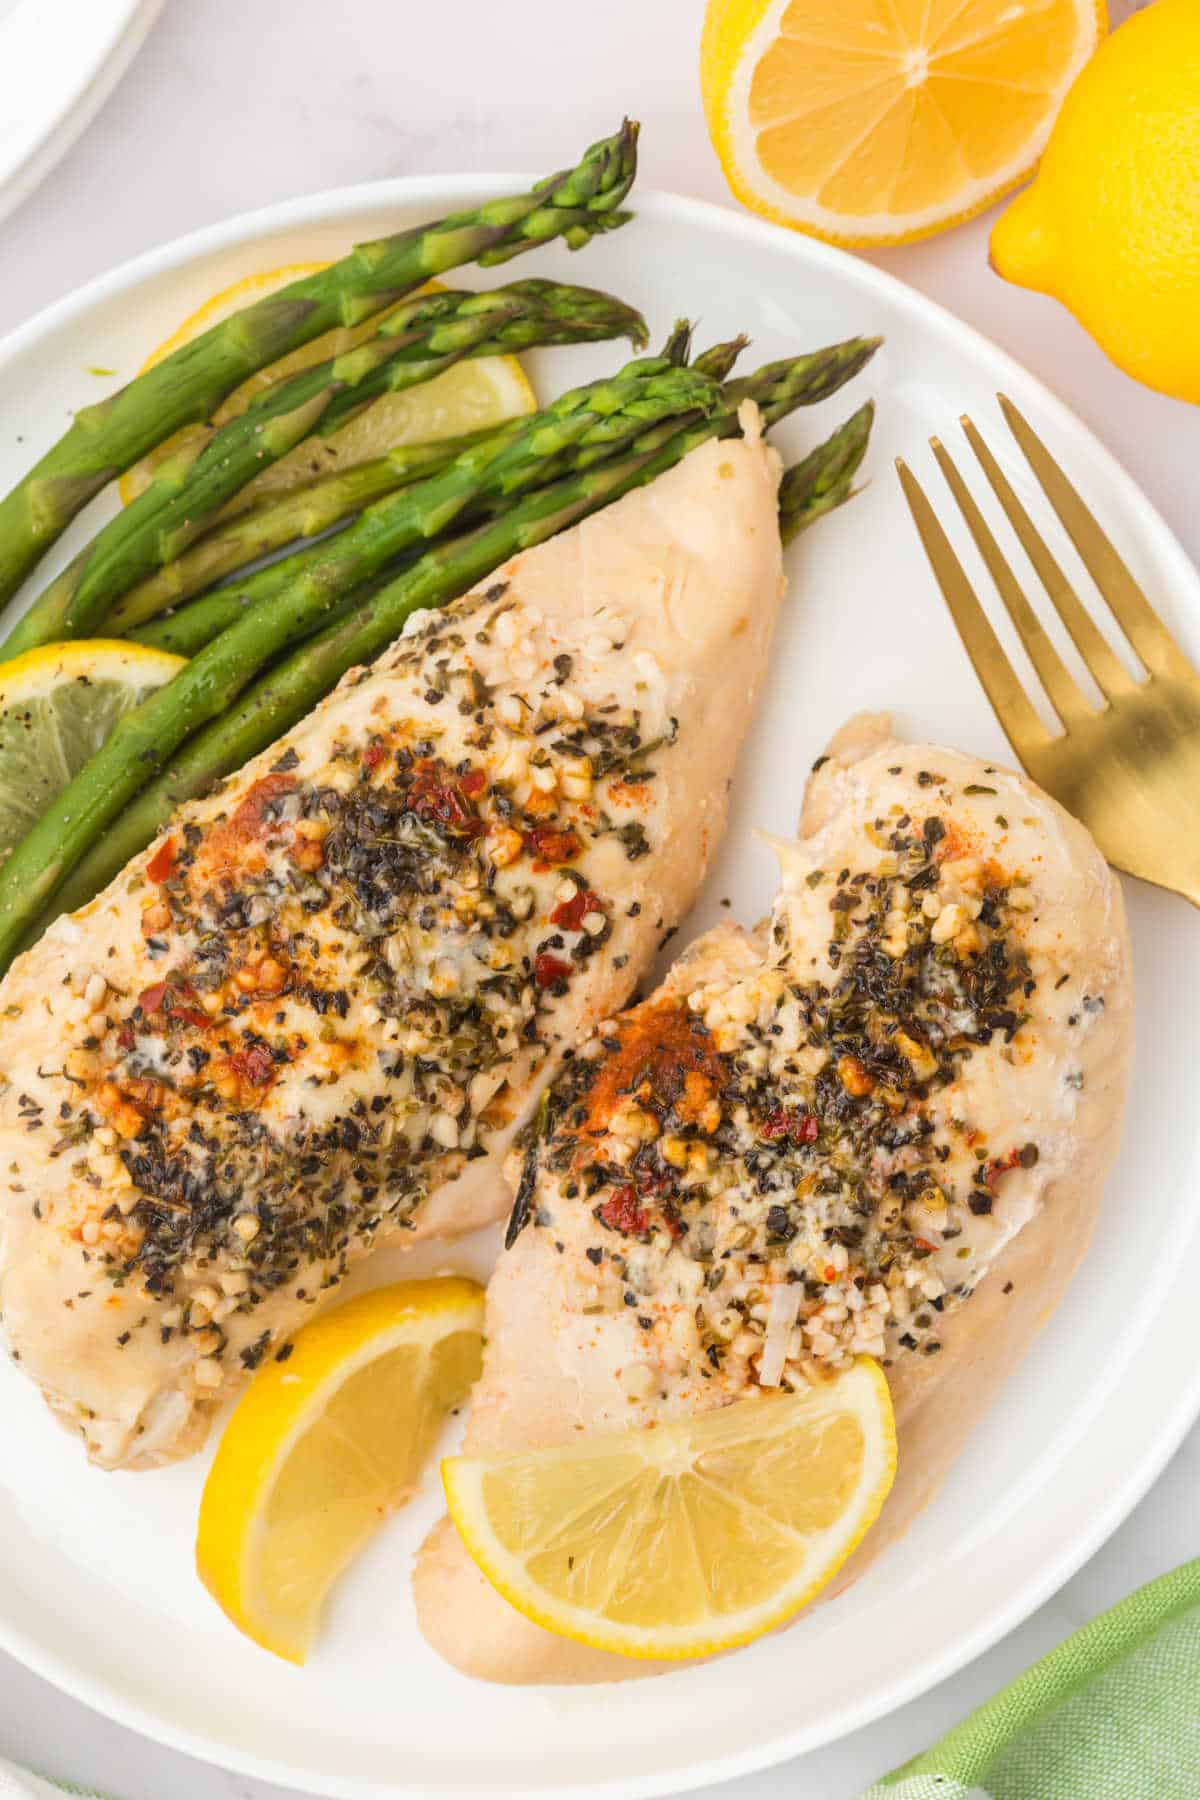 Lemon Garlic butter chicken on a plate with asparagus.